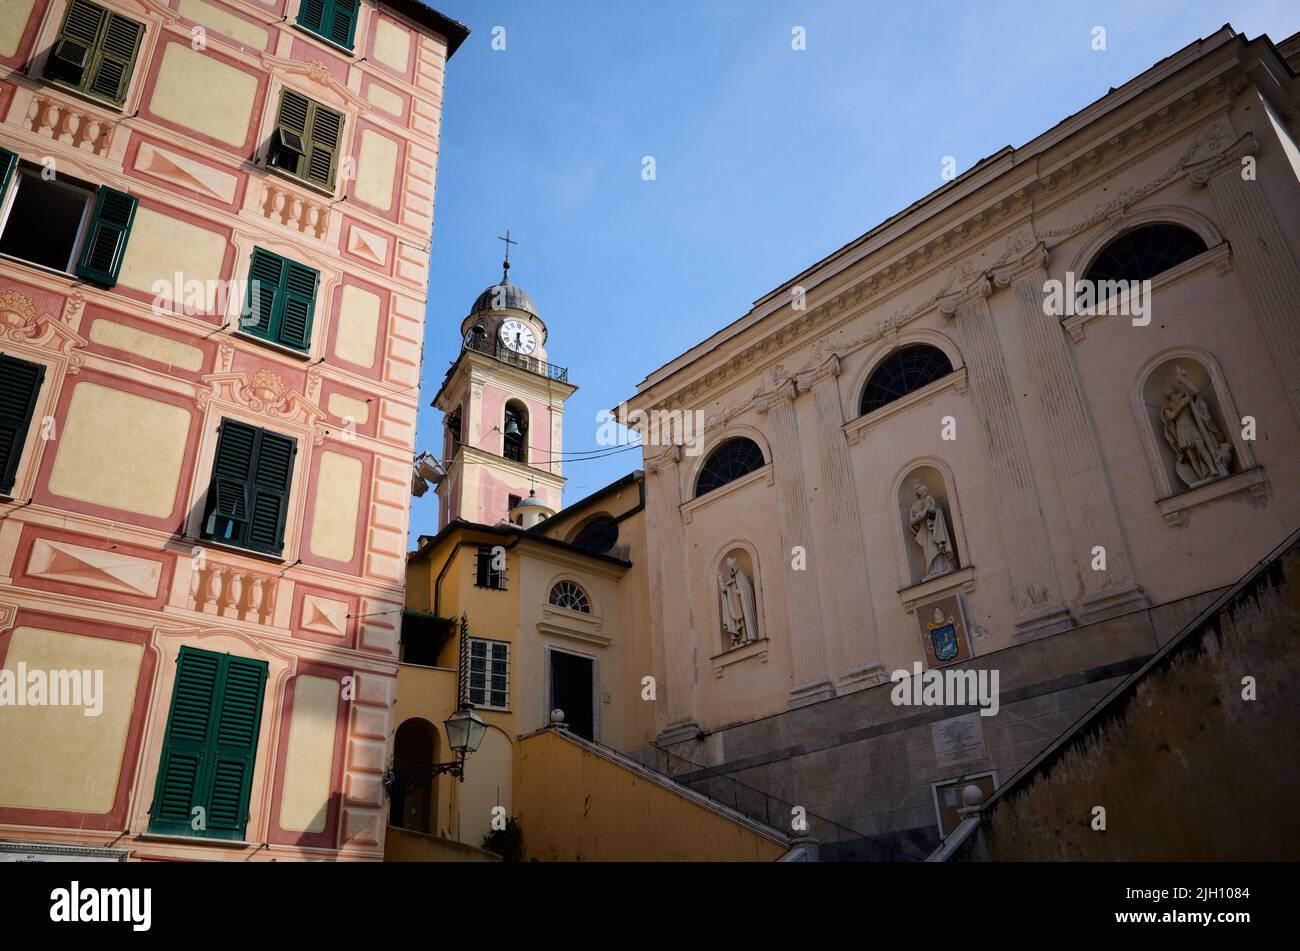 View of bell tower of church called Basilica di Santa Maria Assunta and side wall of temple with statues, Camogli, Liguria, Italy Stock Photo